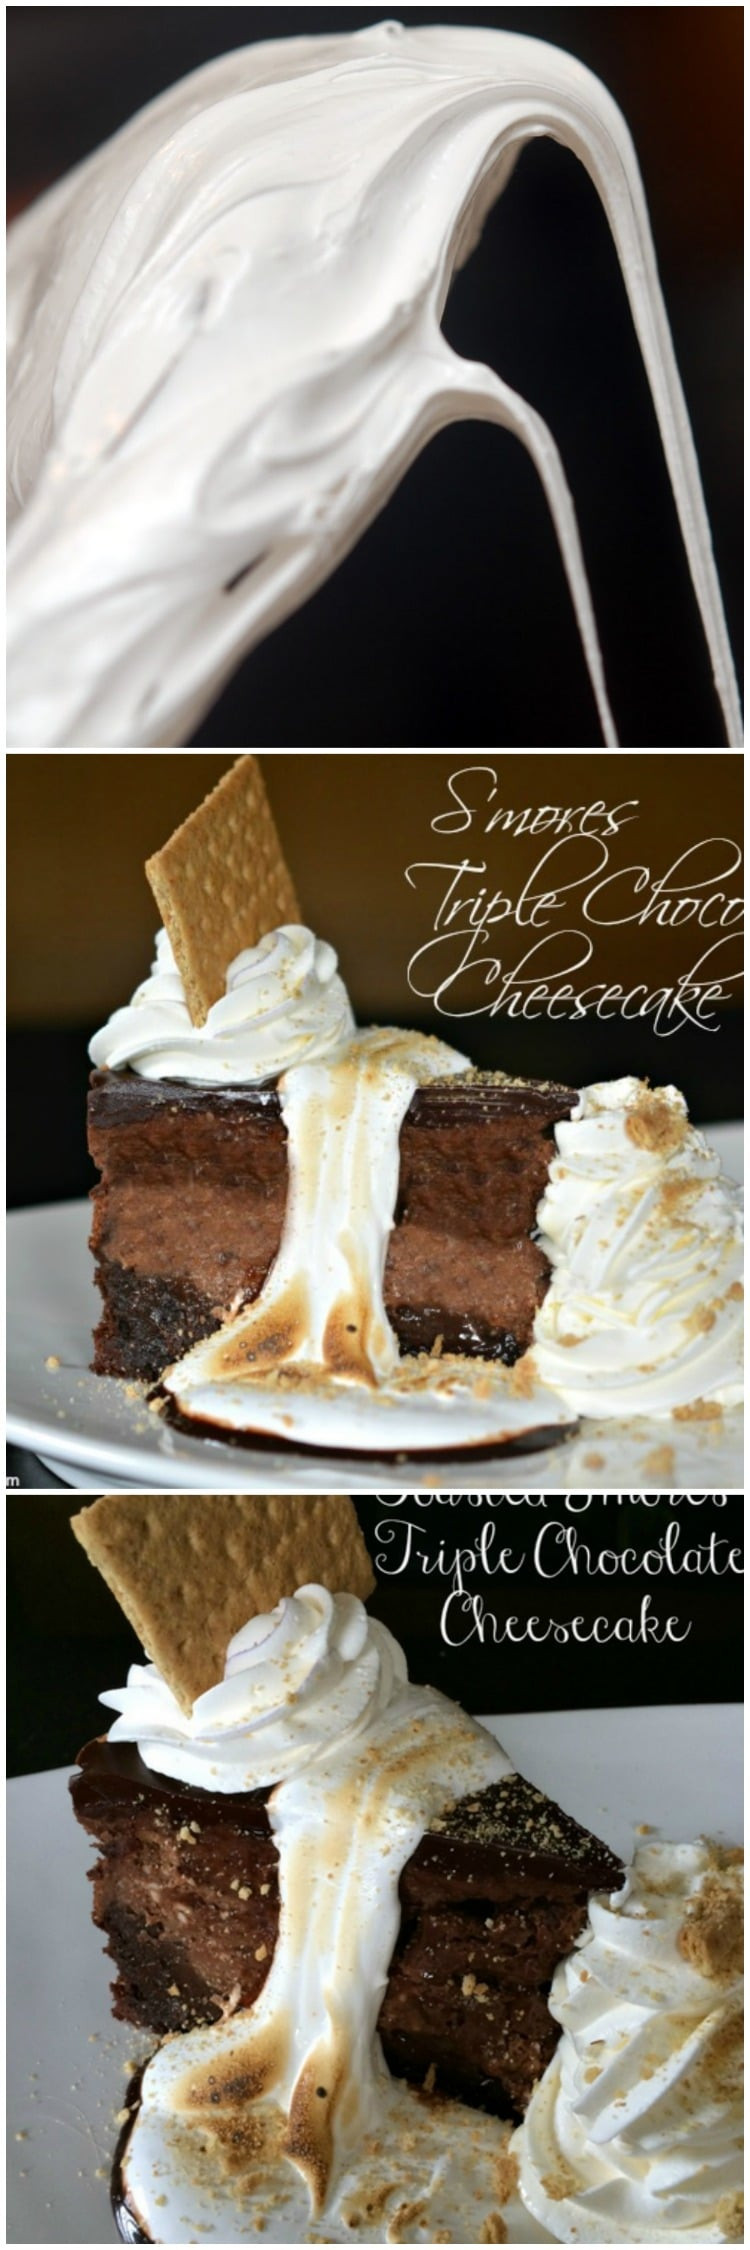 Cheesecake Factory Recipe
 Copycat Cheesecake Factory Toasted S mores Chocolate